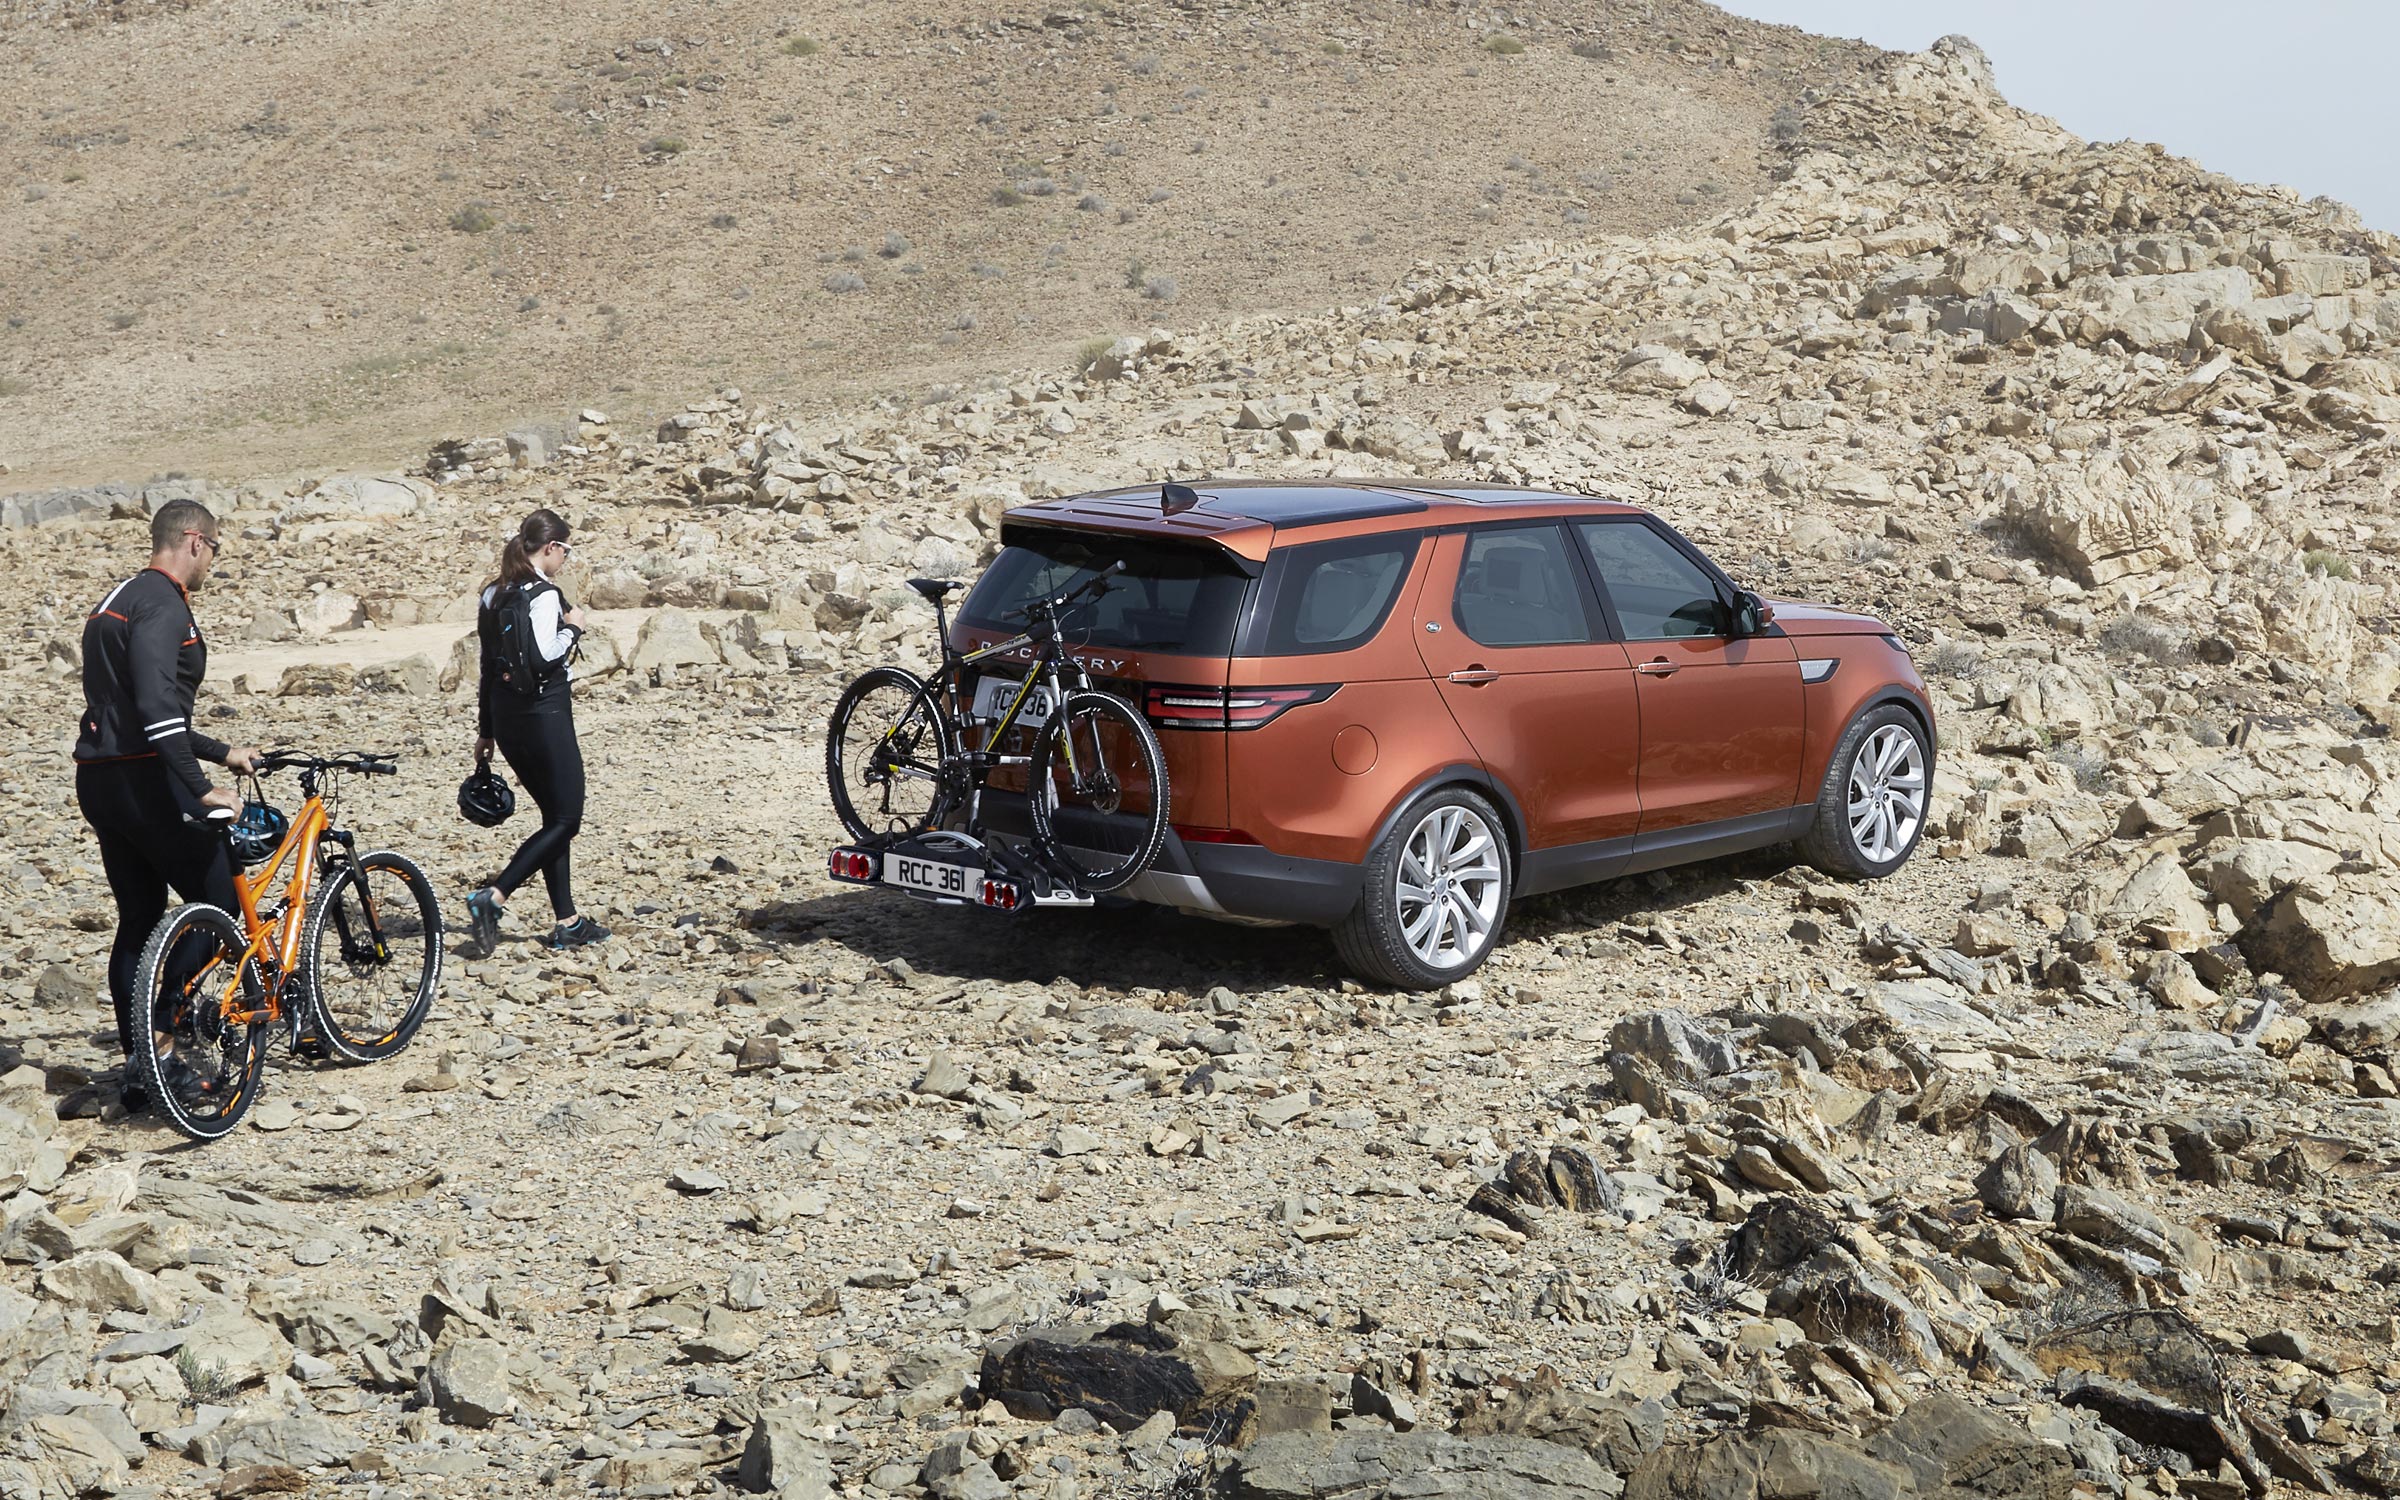  Land Rover Discovery (2016-2020)